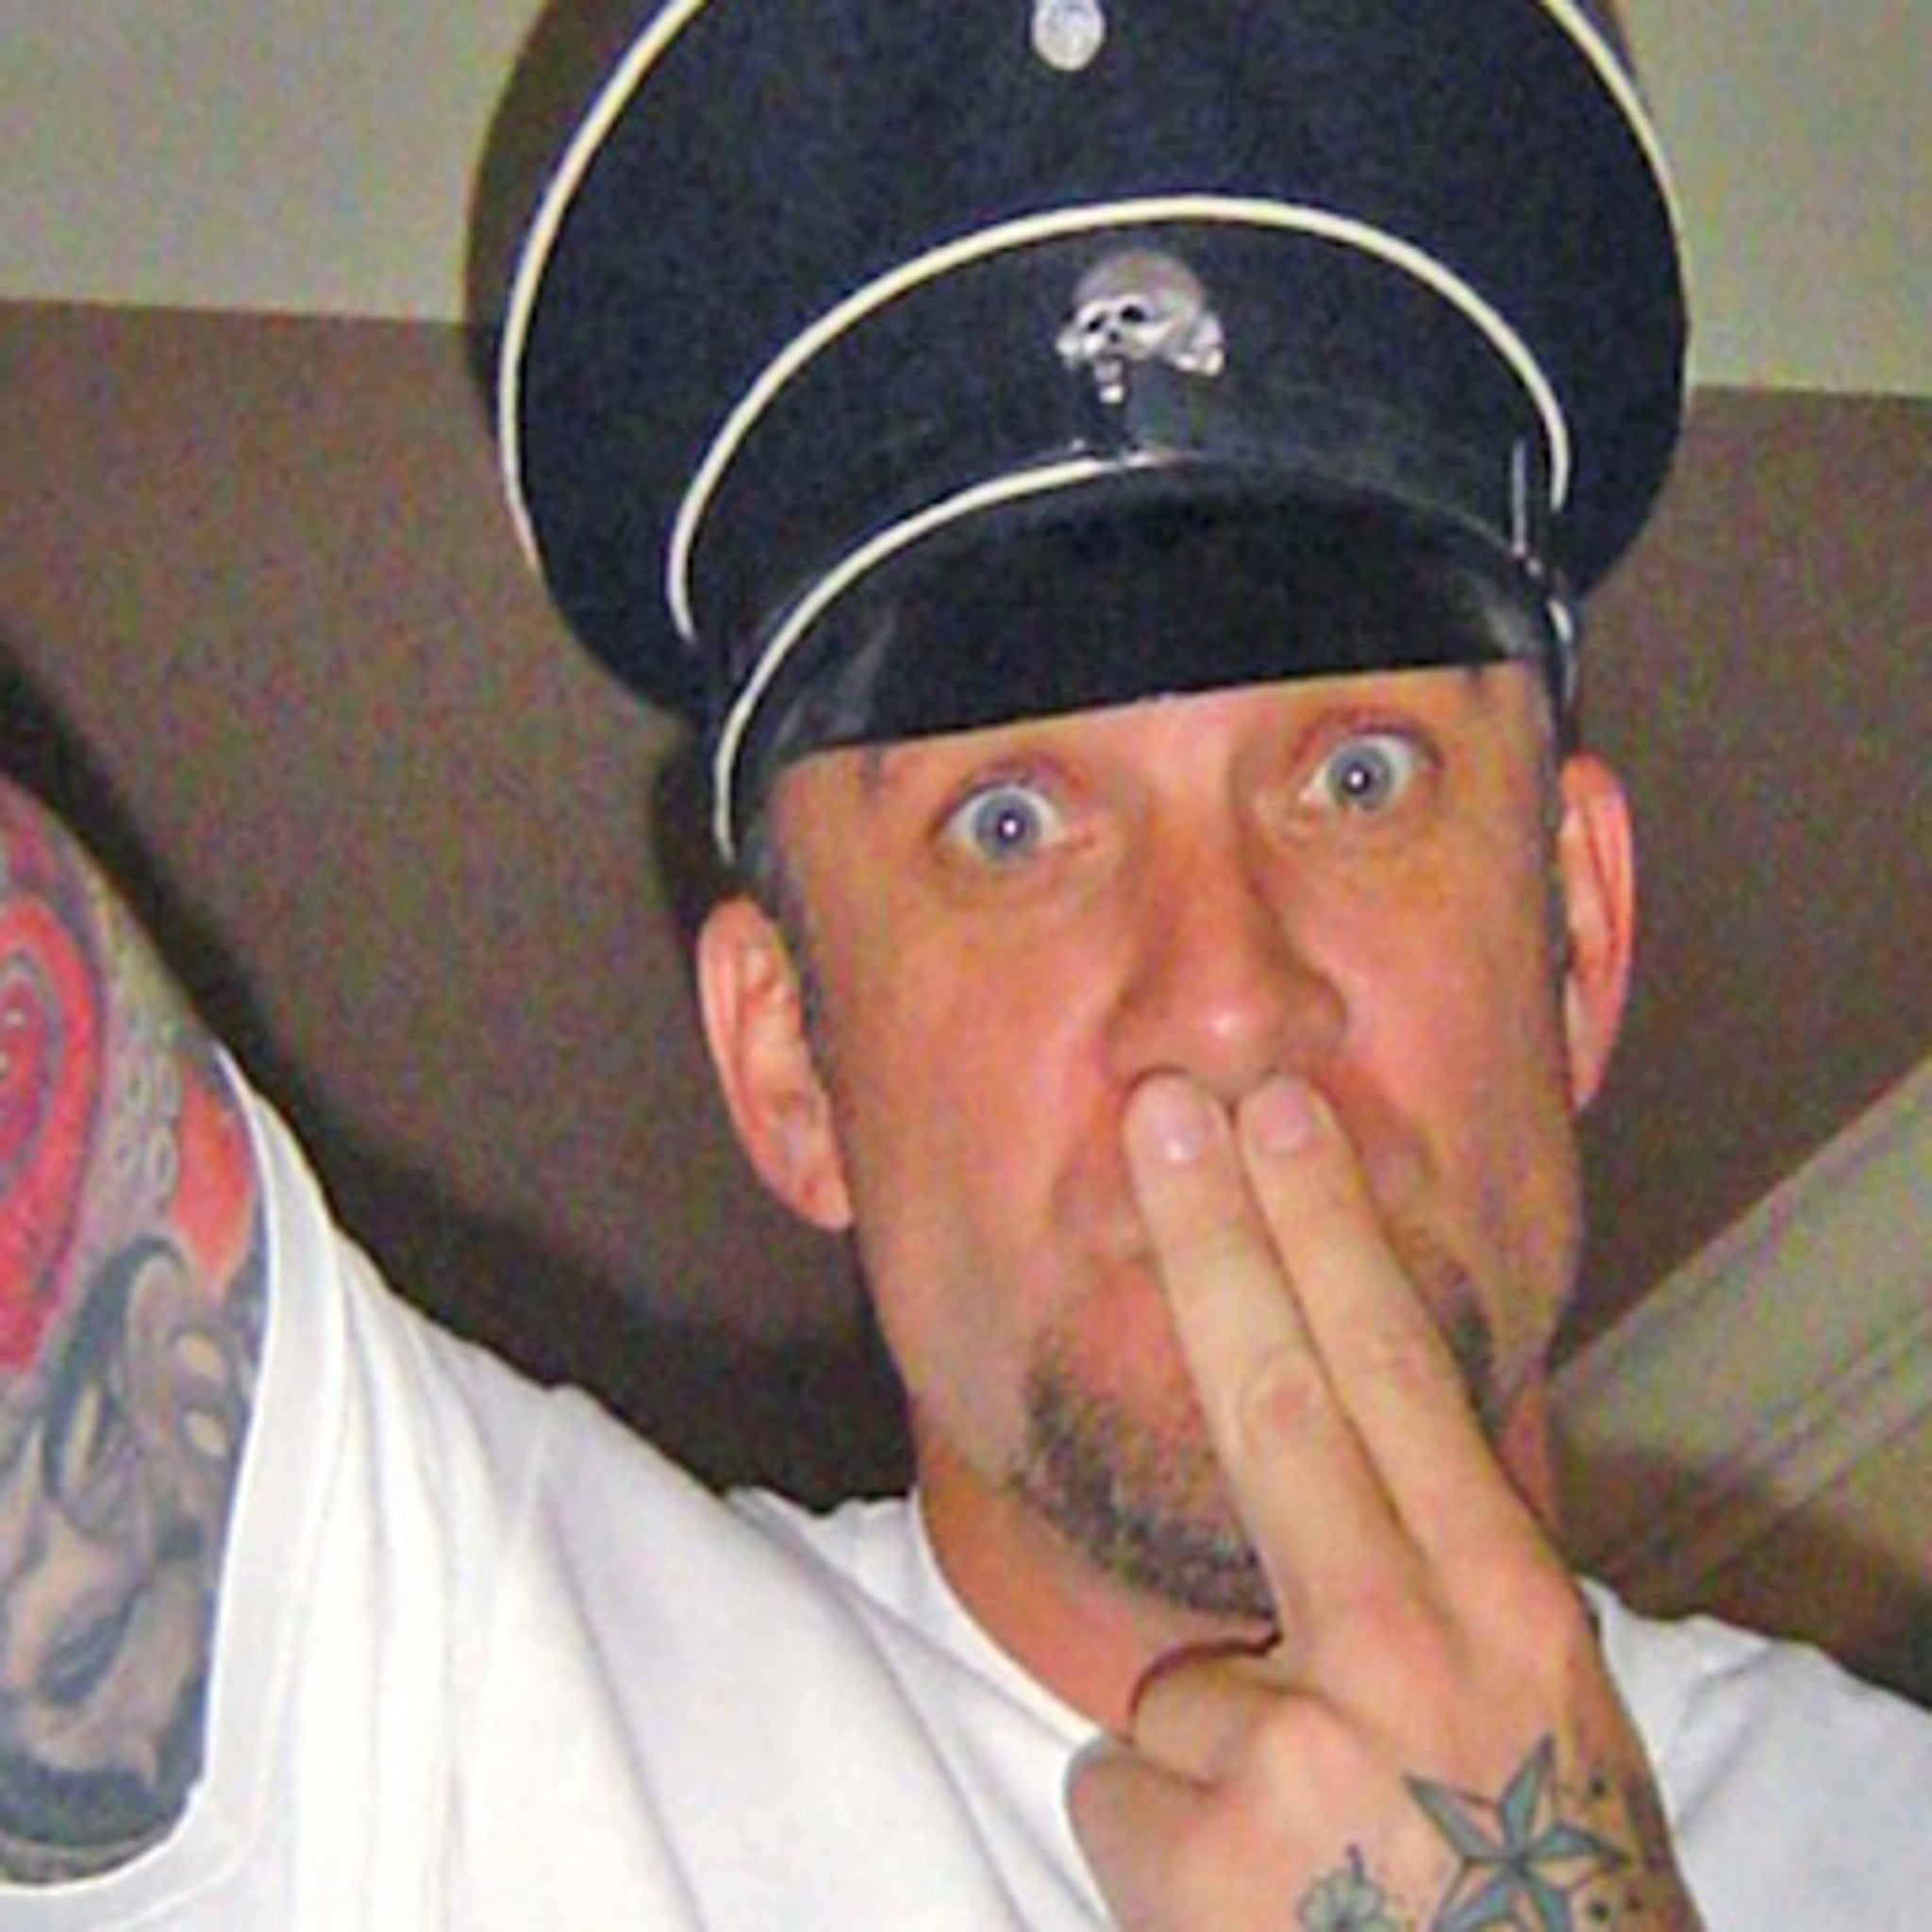 Jesse James Caught In New Nazi Scandal -- New West Coast Choppers Logo  Bears Disturbing Resemblance To The Iron Eagle